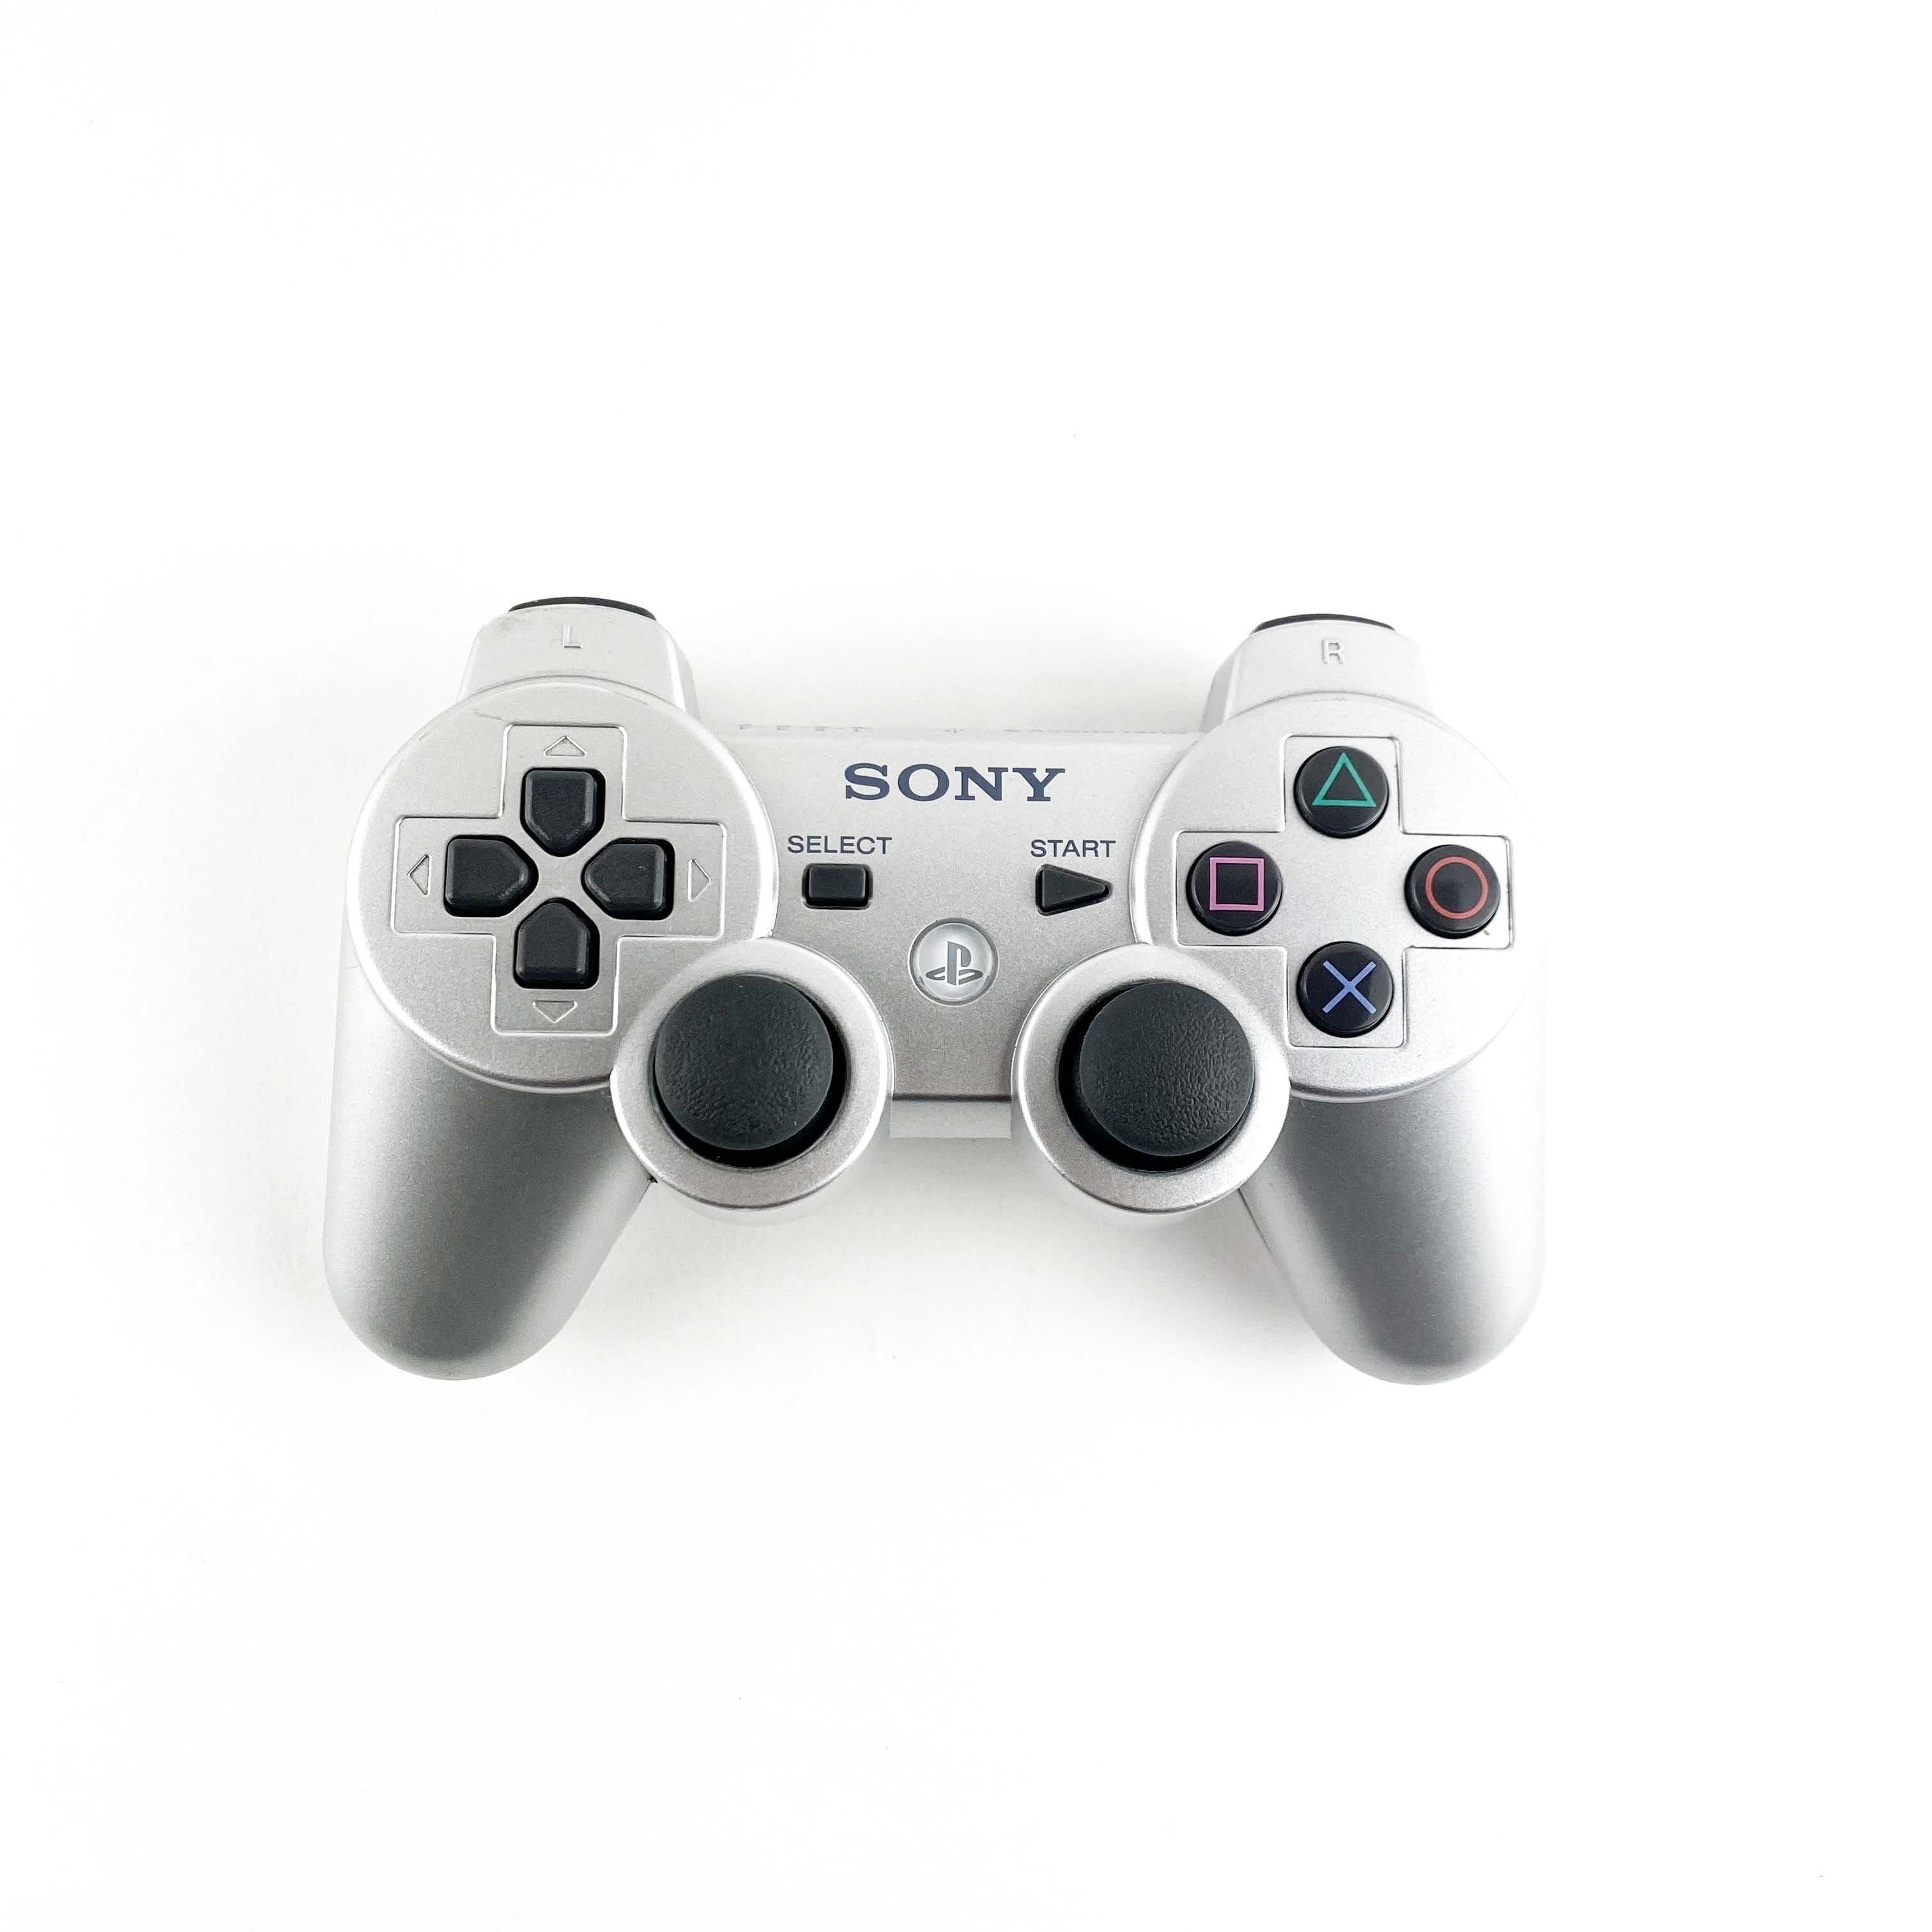 Sony PlayStation 3 PS3 Silver DualShock 3 Wireless Controller